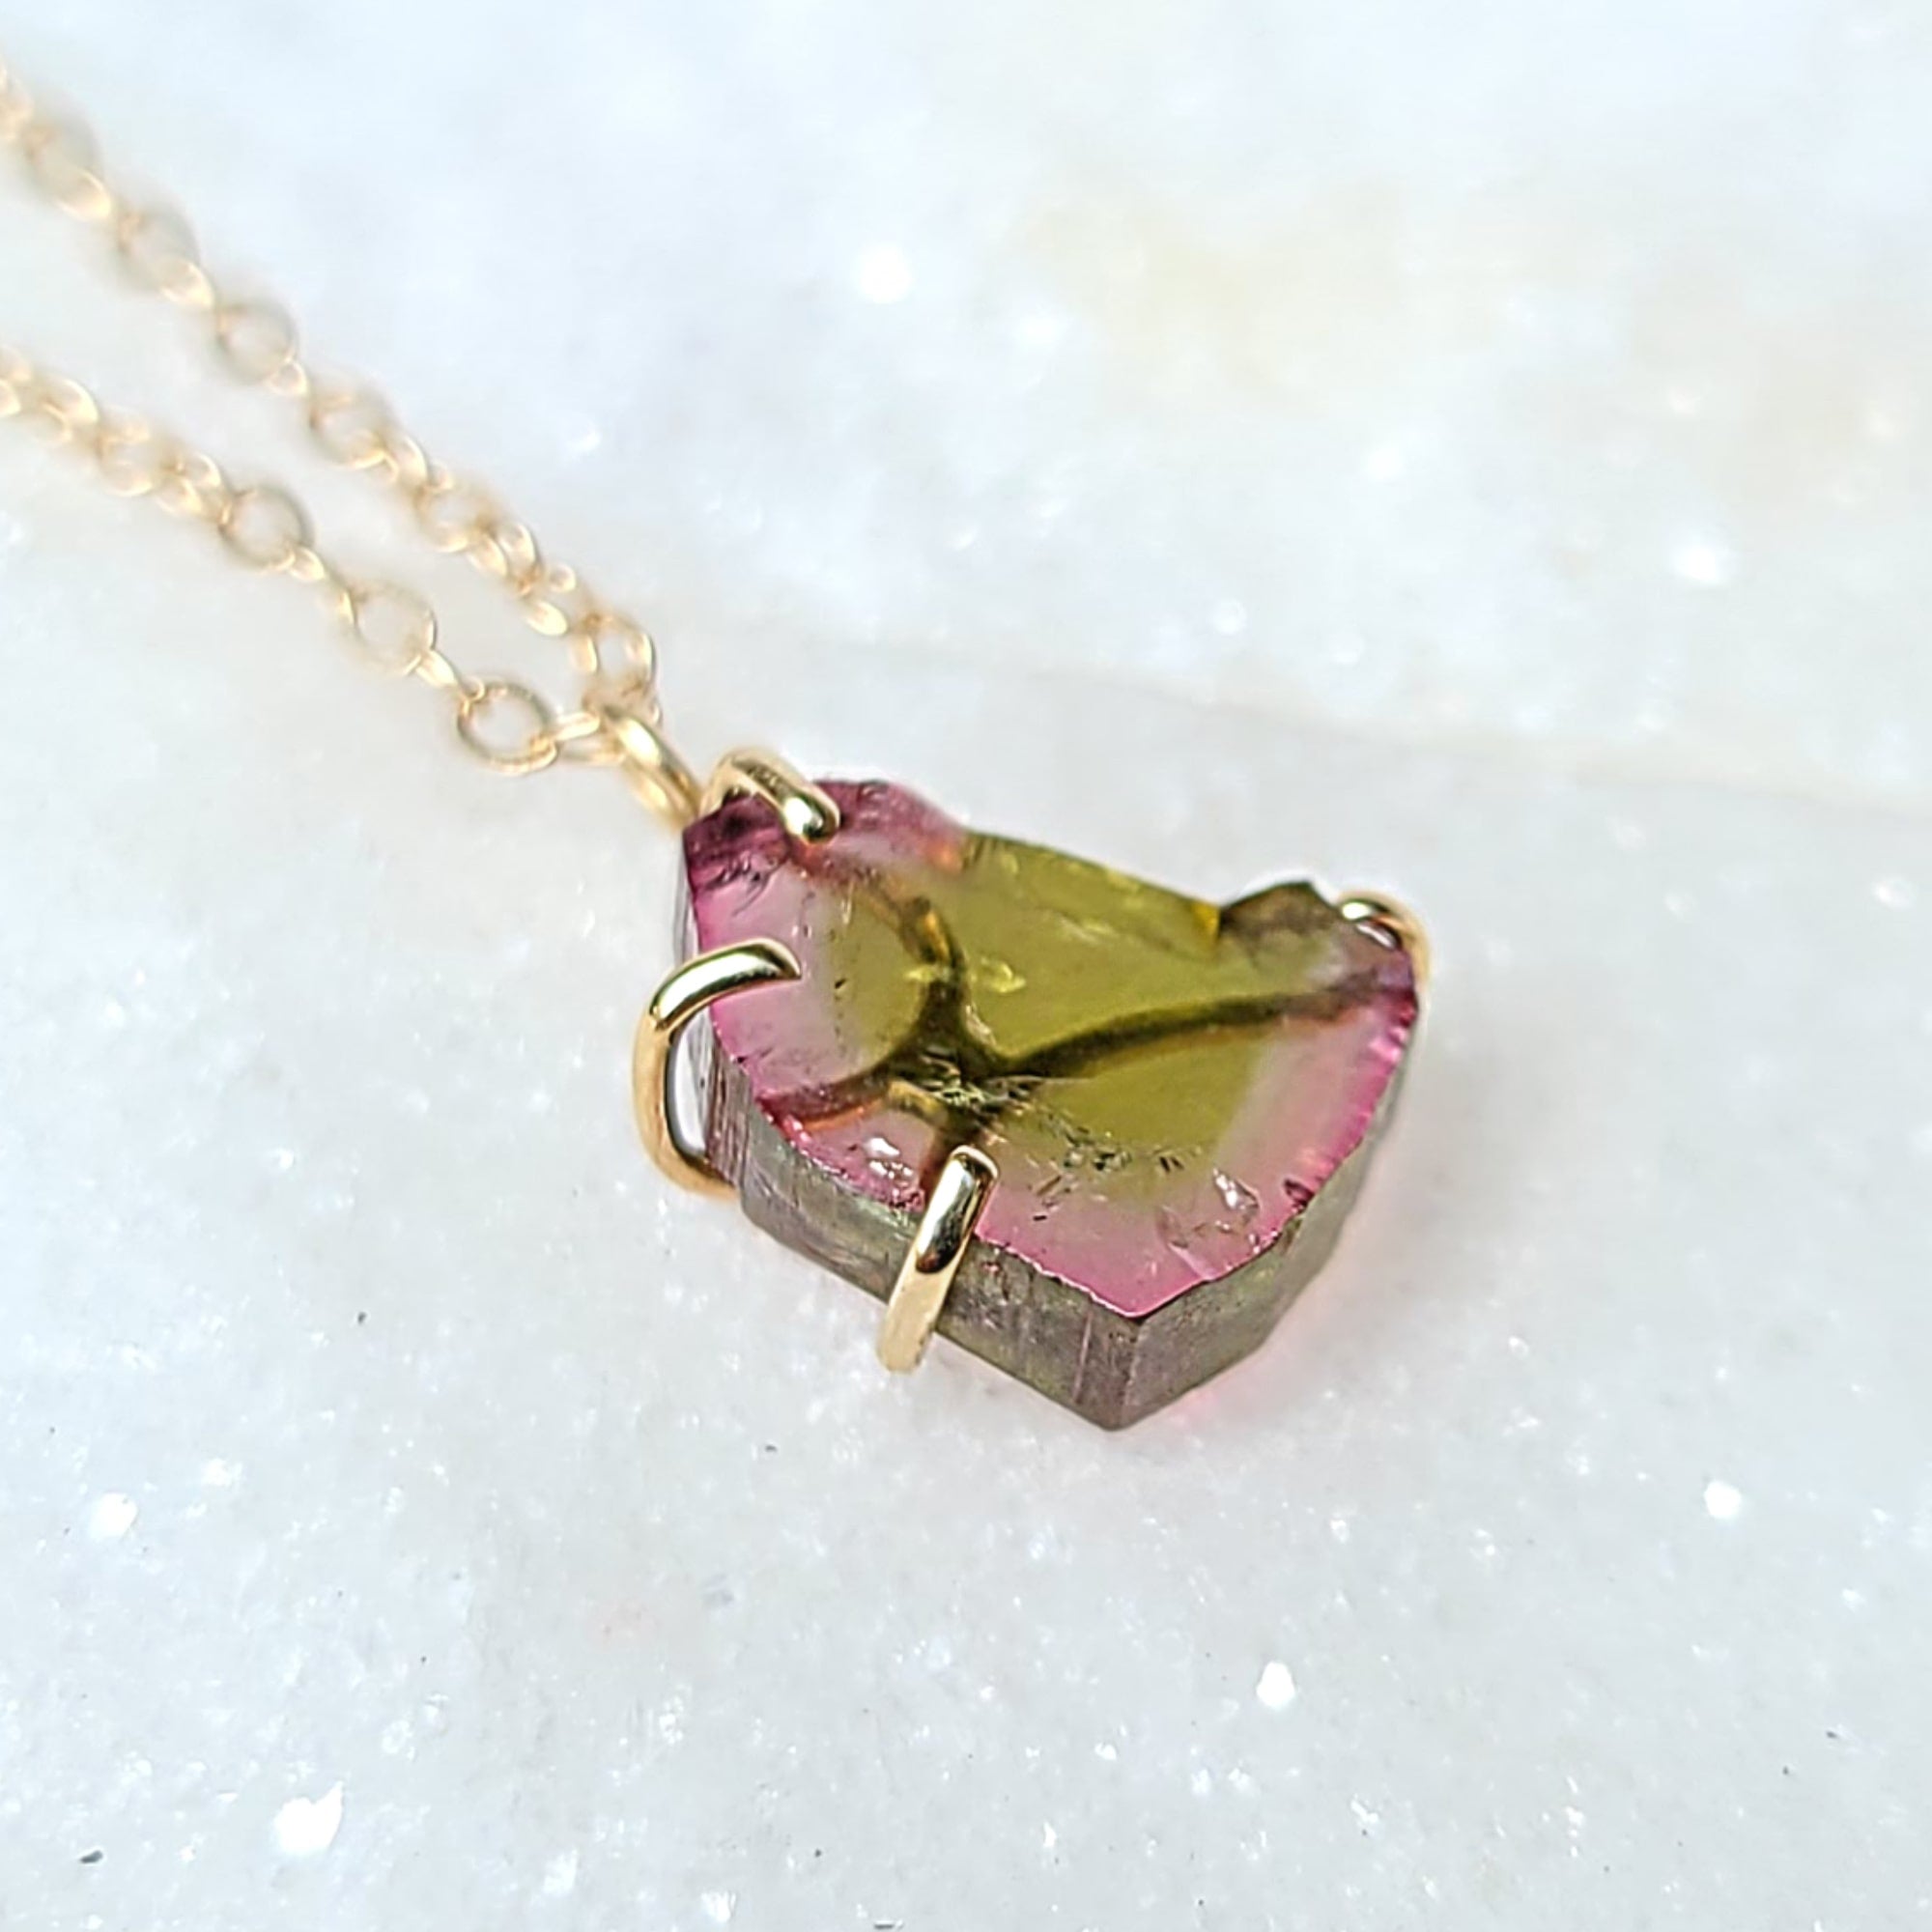 Watermelon Tourmaline Necklace Pendant | Handmade Jewelry in Colorado |  Rose Gold and Silver | J Mancarella Jewelry | J MANCARELLA JEWELRY